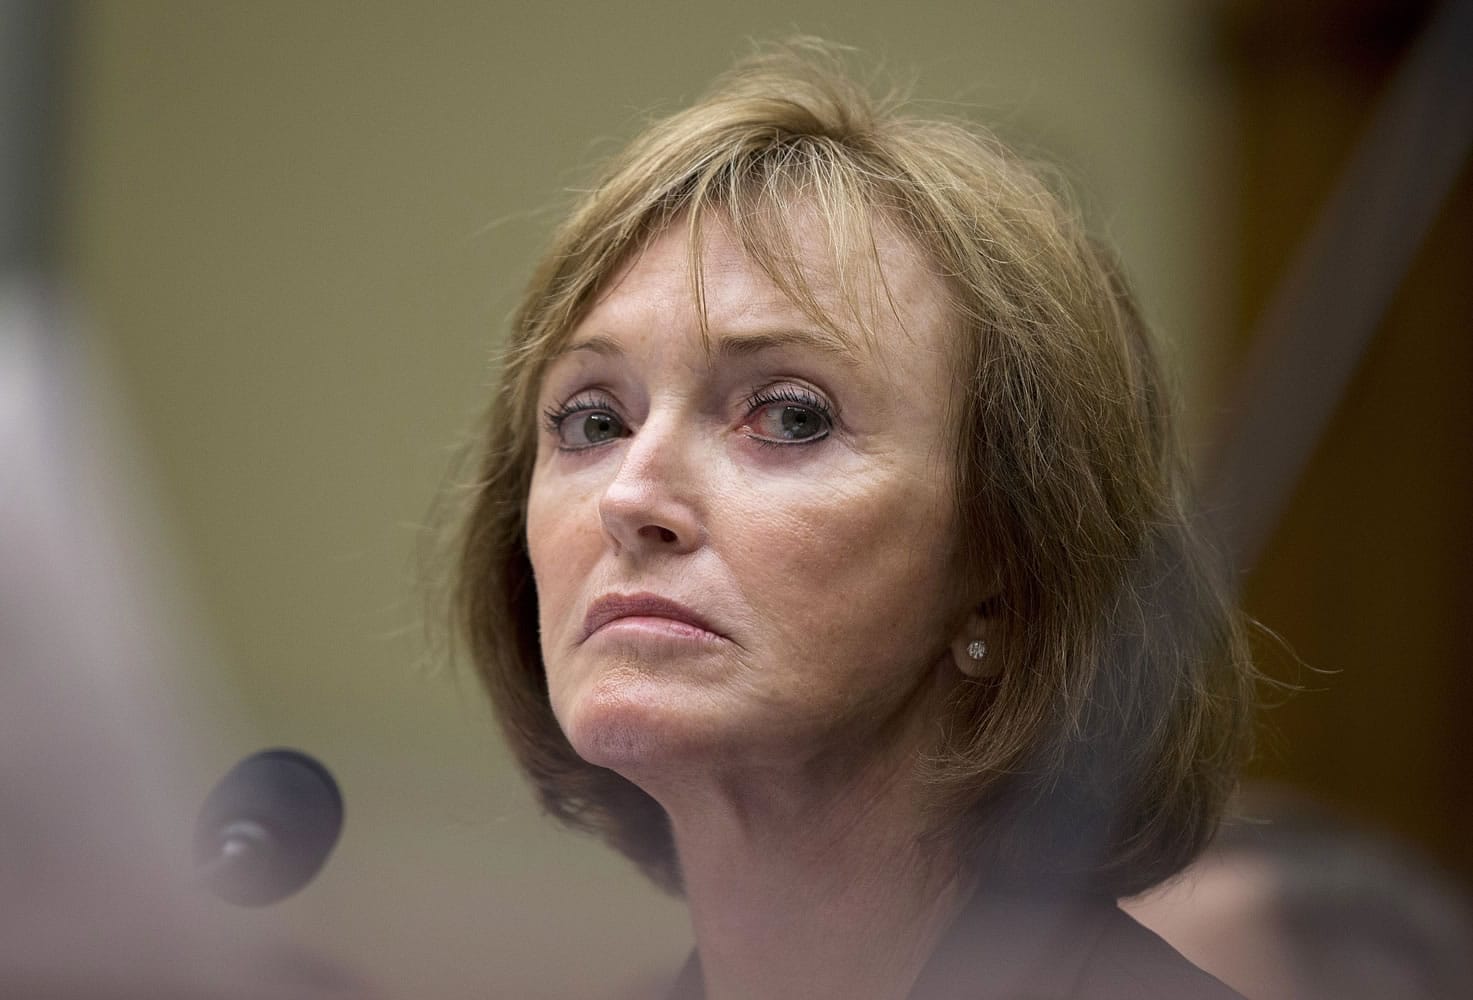 Medicaid Administrator Marilyn Tavenner testifies Sept. 18 on Capitol Hill in Washington. Tavenner -- who oversaw the rocky rollout of the president's health care law -- says she's stepping down at the end of February.